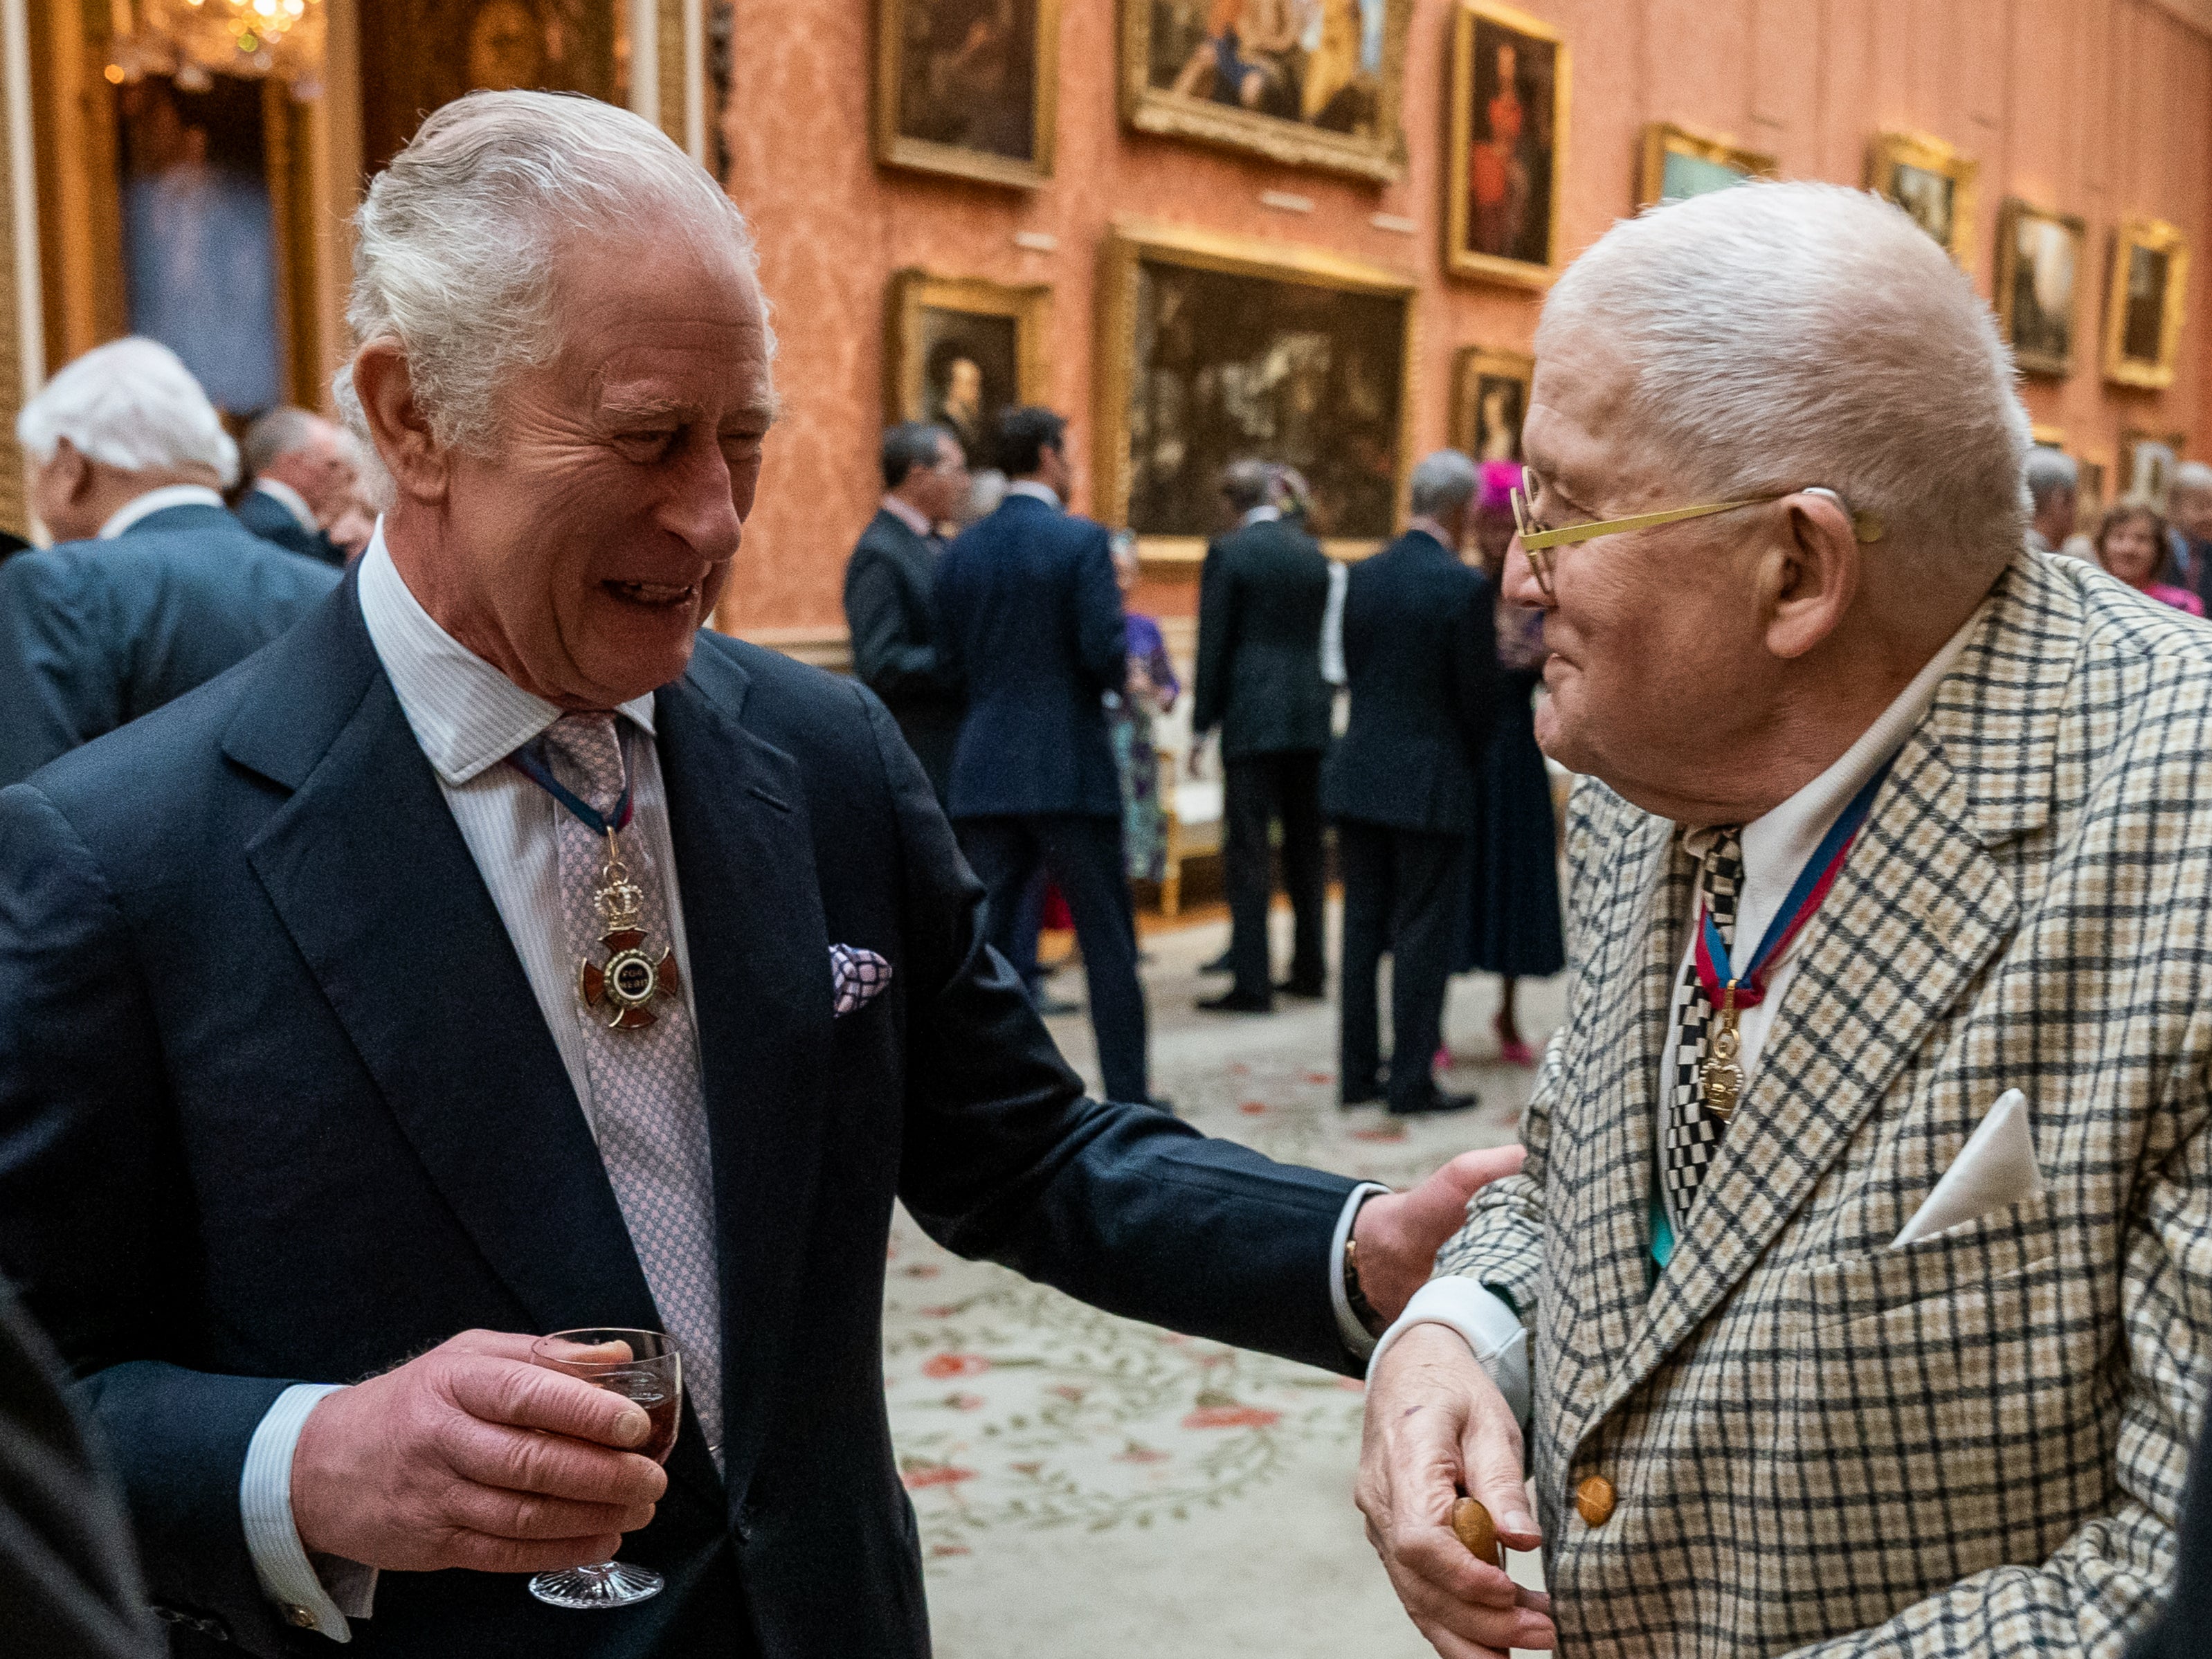 David Croc-kney: with King Charles at a luncheon at Buckingham Palace